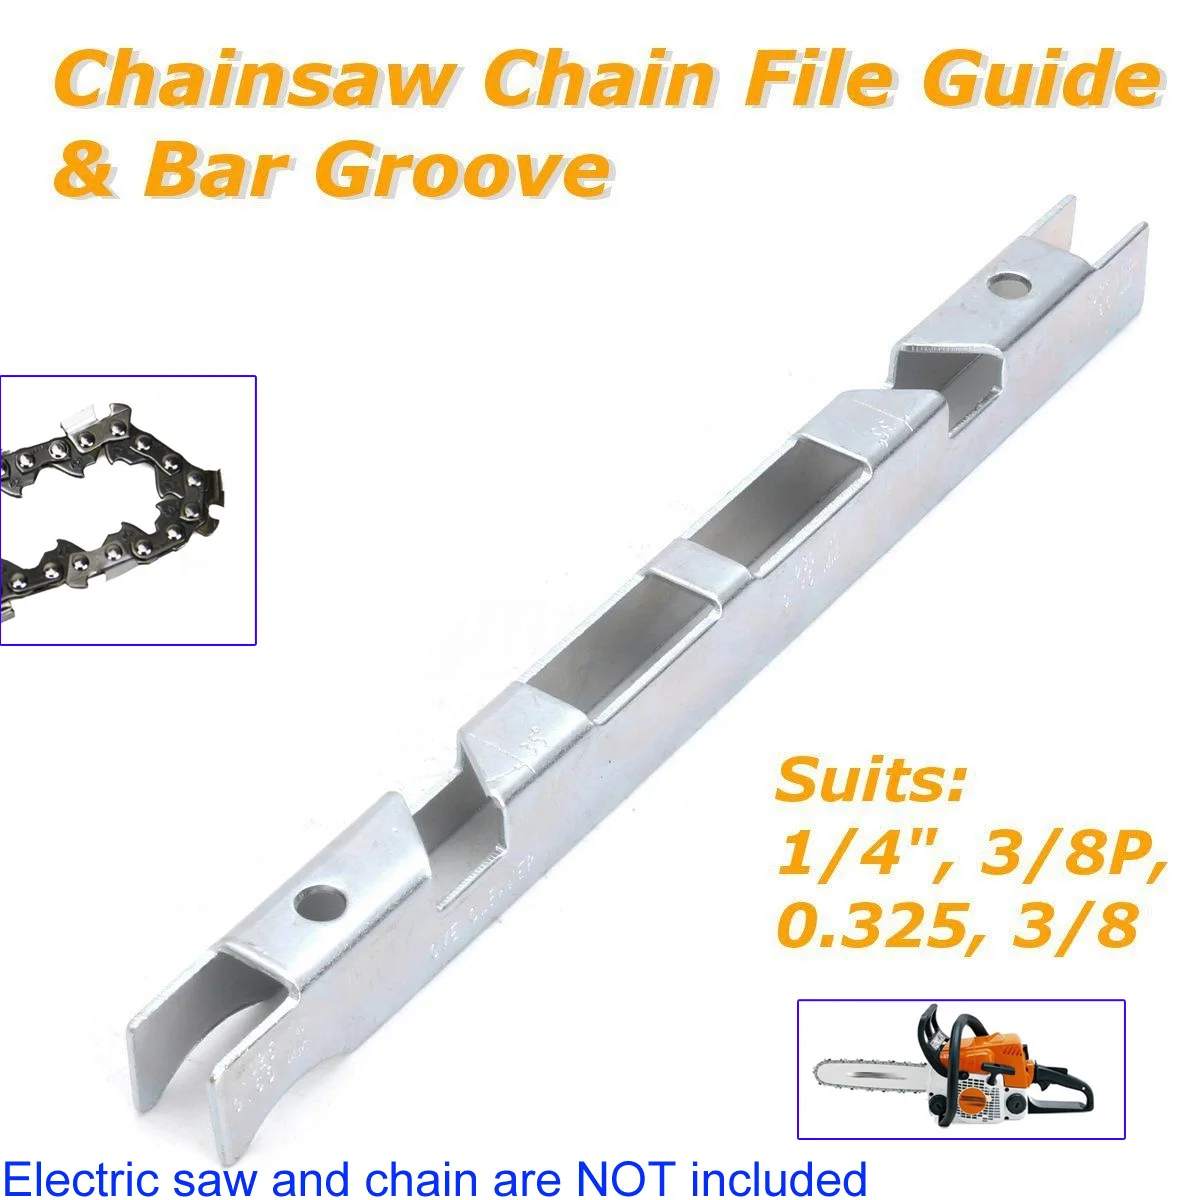 

Chainsaw Chain Depth Gauge Guide Bar Groove For 1/4" 3/8" P 0.325" Chain Saw Chainsaw Part Woodworking Sharpening Tool Kit